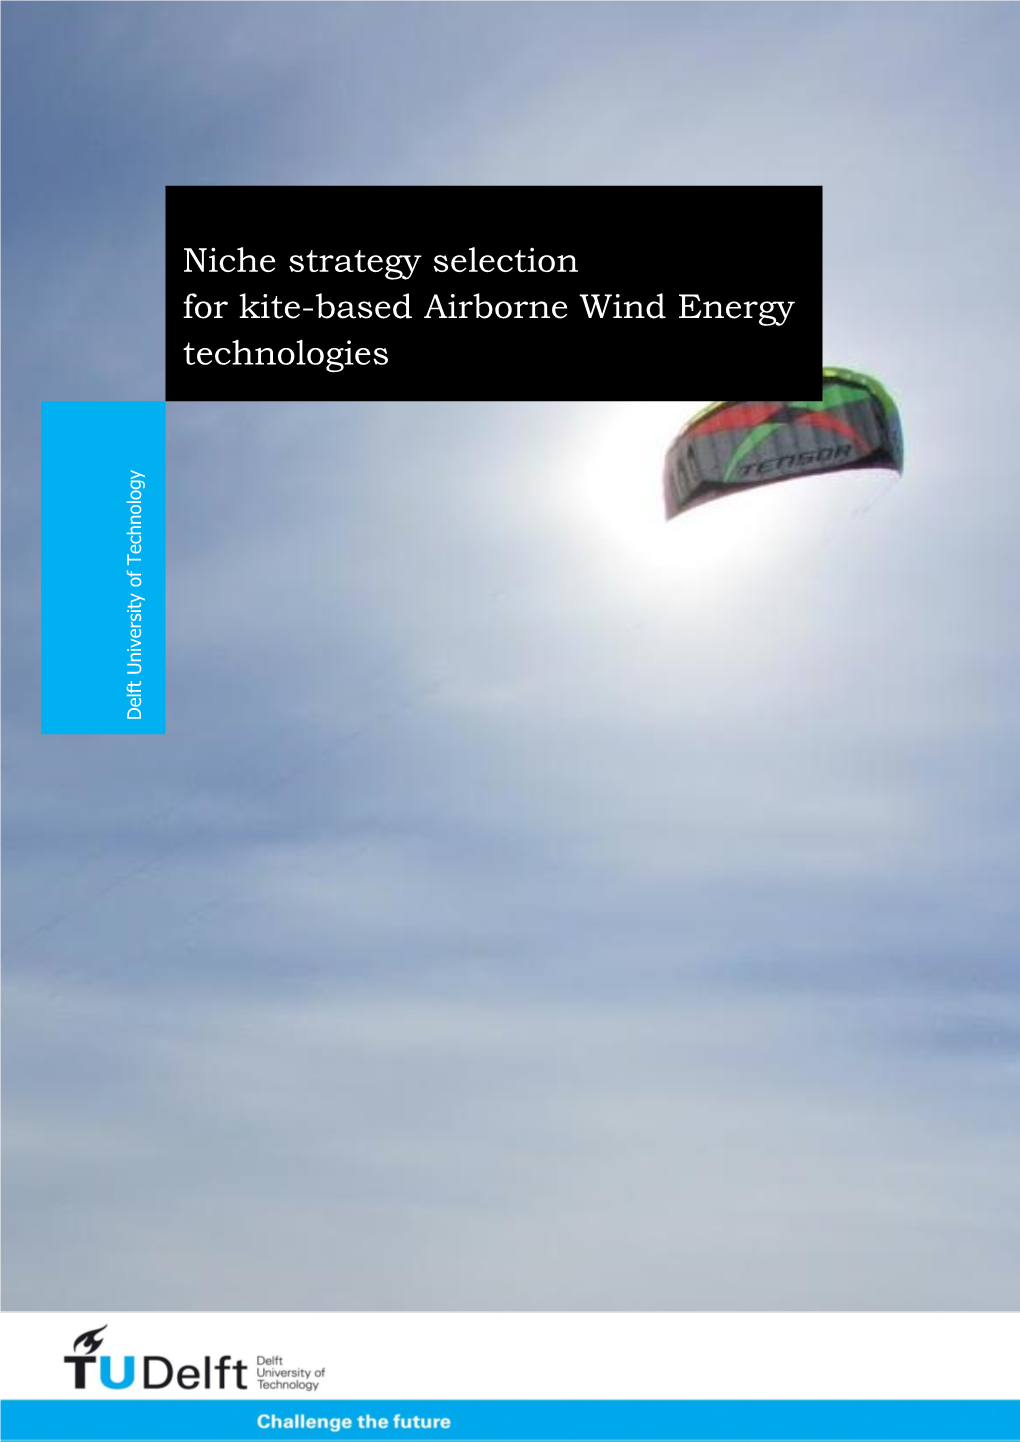 Niche Strategy Selection for Kite-Based Airborne Wind Energy